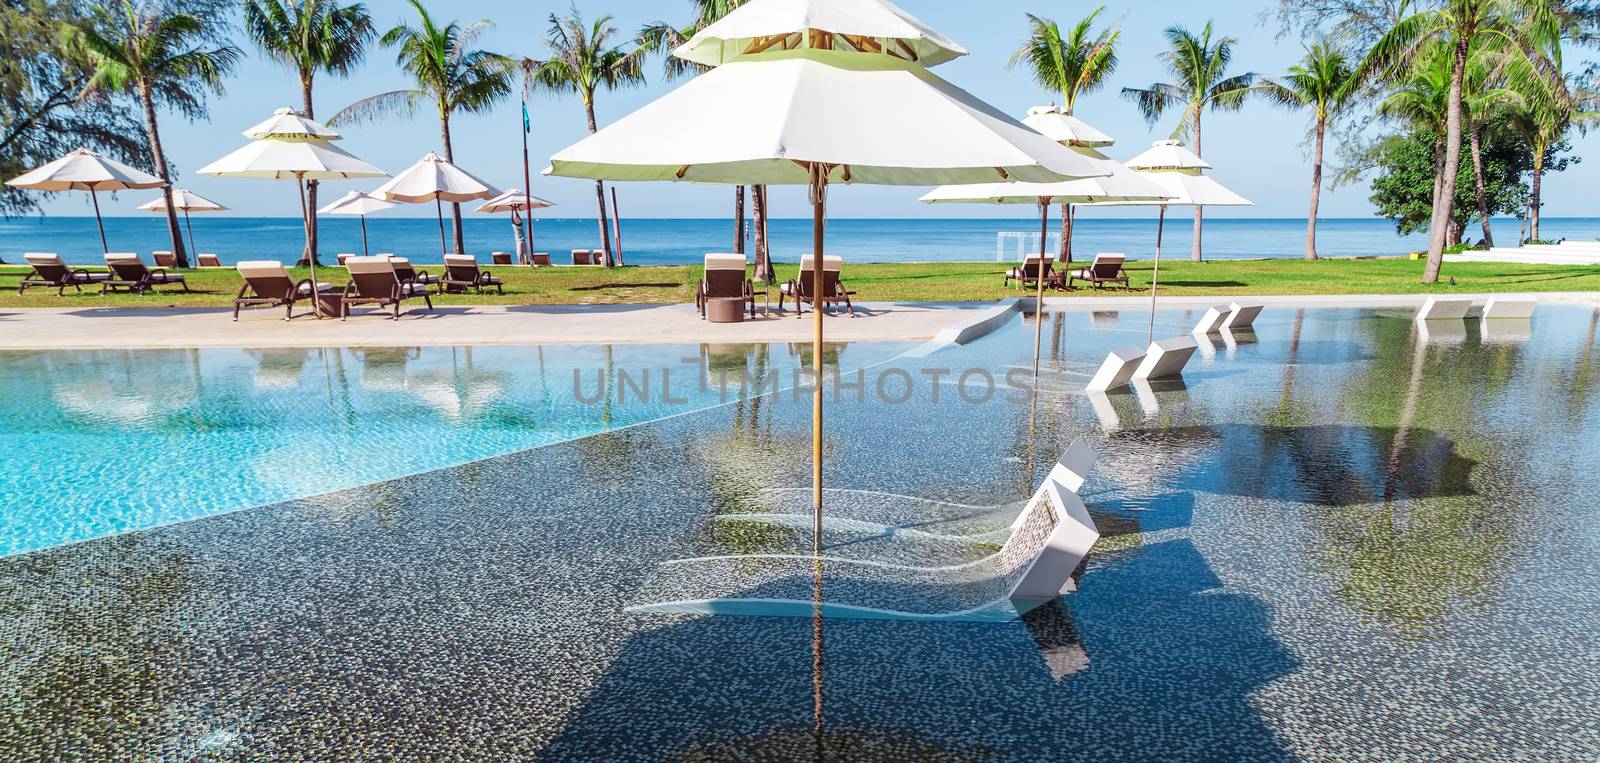 tropical resort hotel with swimming pool. Beach umbrella, beach chair tile floor marble ceramic mosaic. Vacation and travel concept.